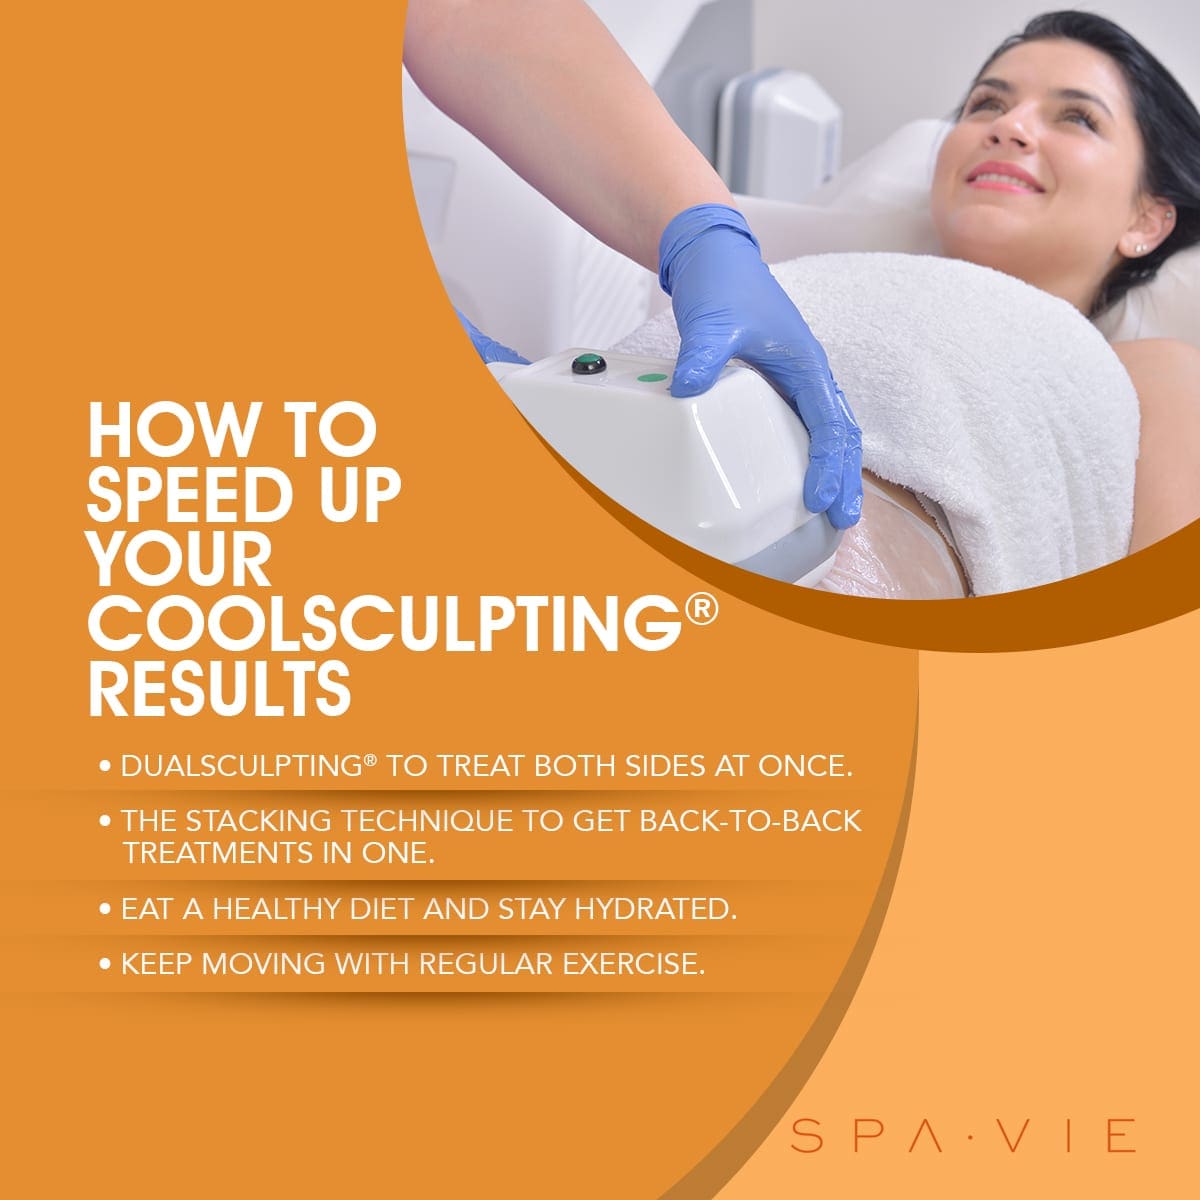 How to speed up your coolsculpting